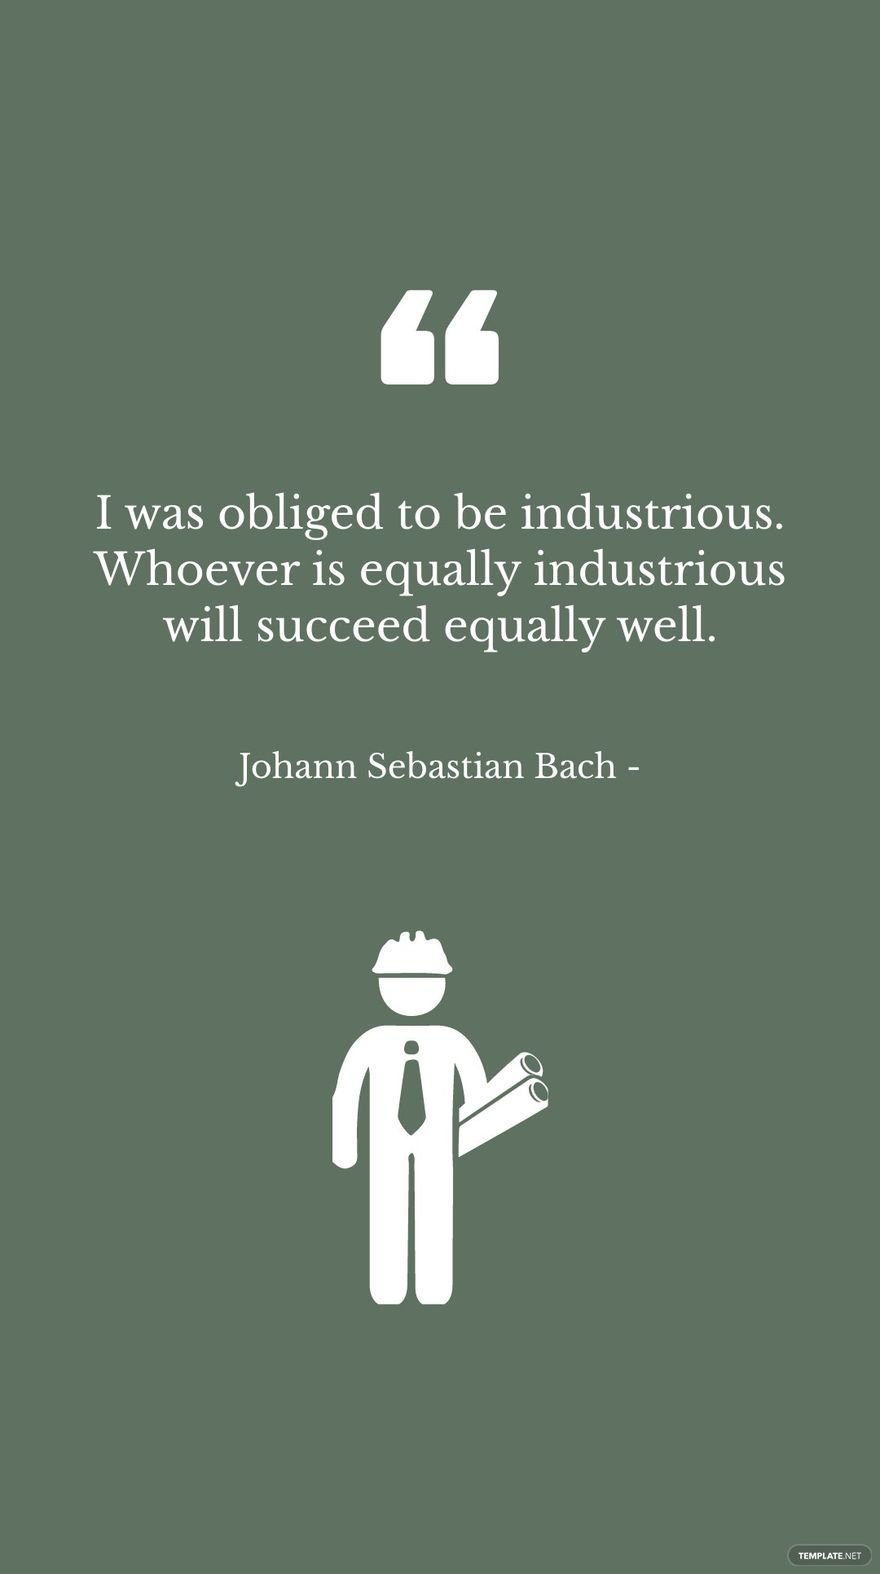 Johann Sebastian Bach - I was obliged to be industrious. Whoever is equally industrious will succeed equally well. in JPG